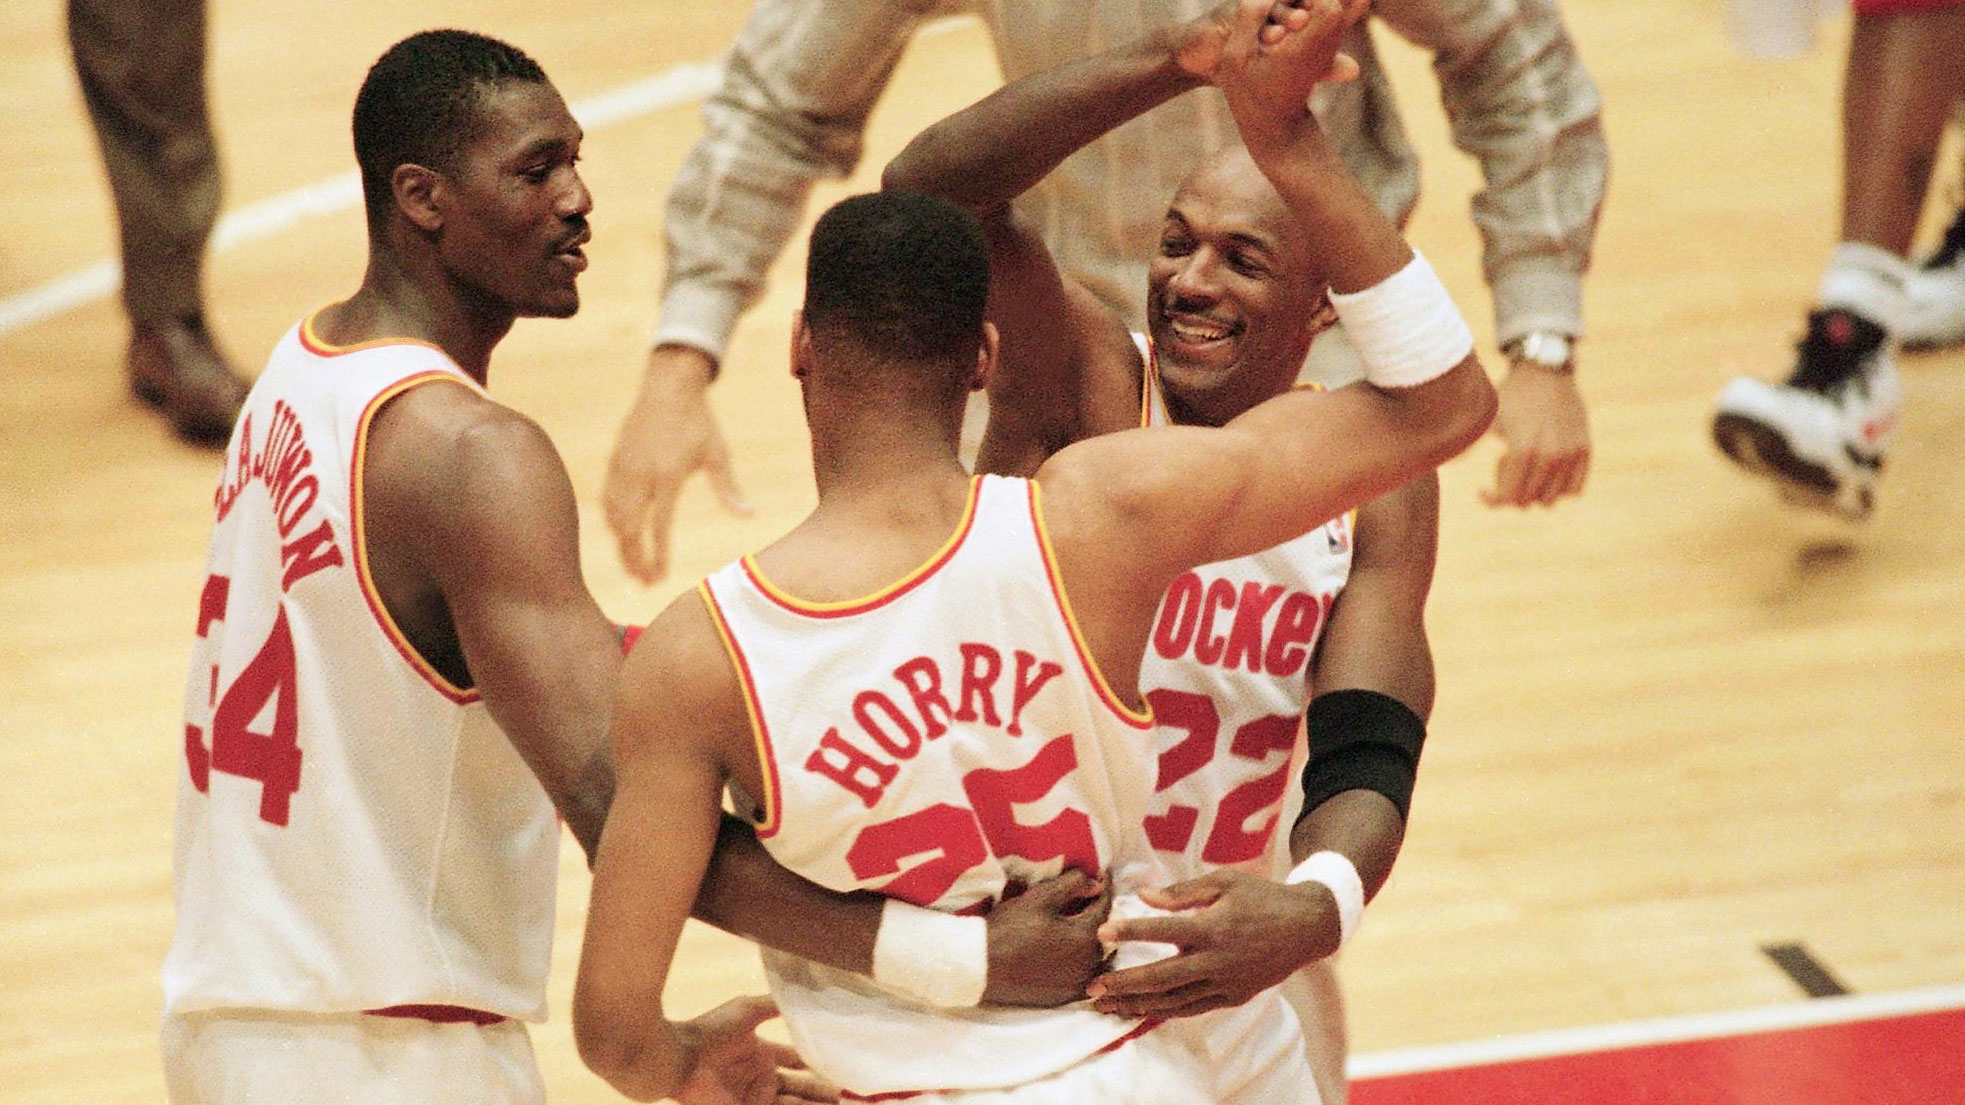 Houston Rockets' players Hakeem Olajuwon, left, Robert Horry (25), and Clyde Drexler (22) celebrate their victory over the Magic after Game 3 of the NBA Finals on June 11, 1995.